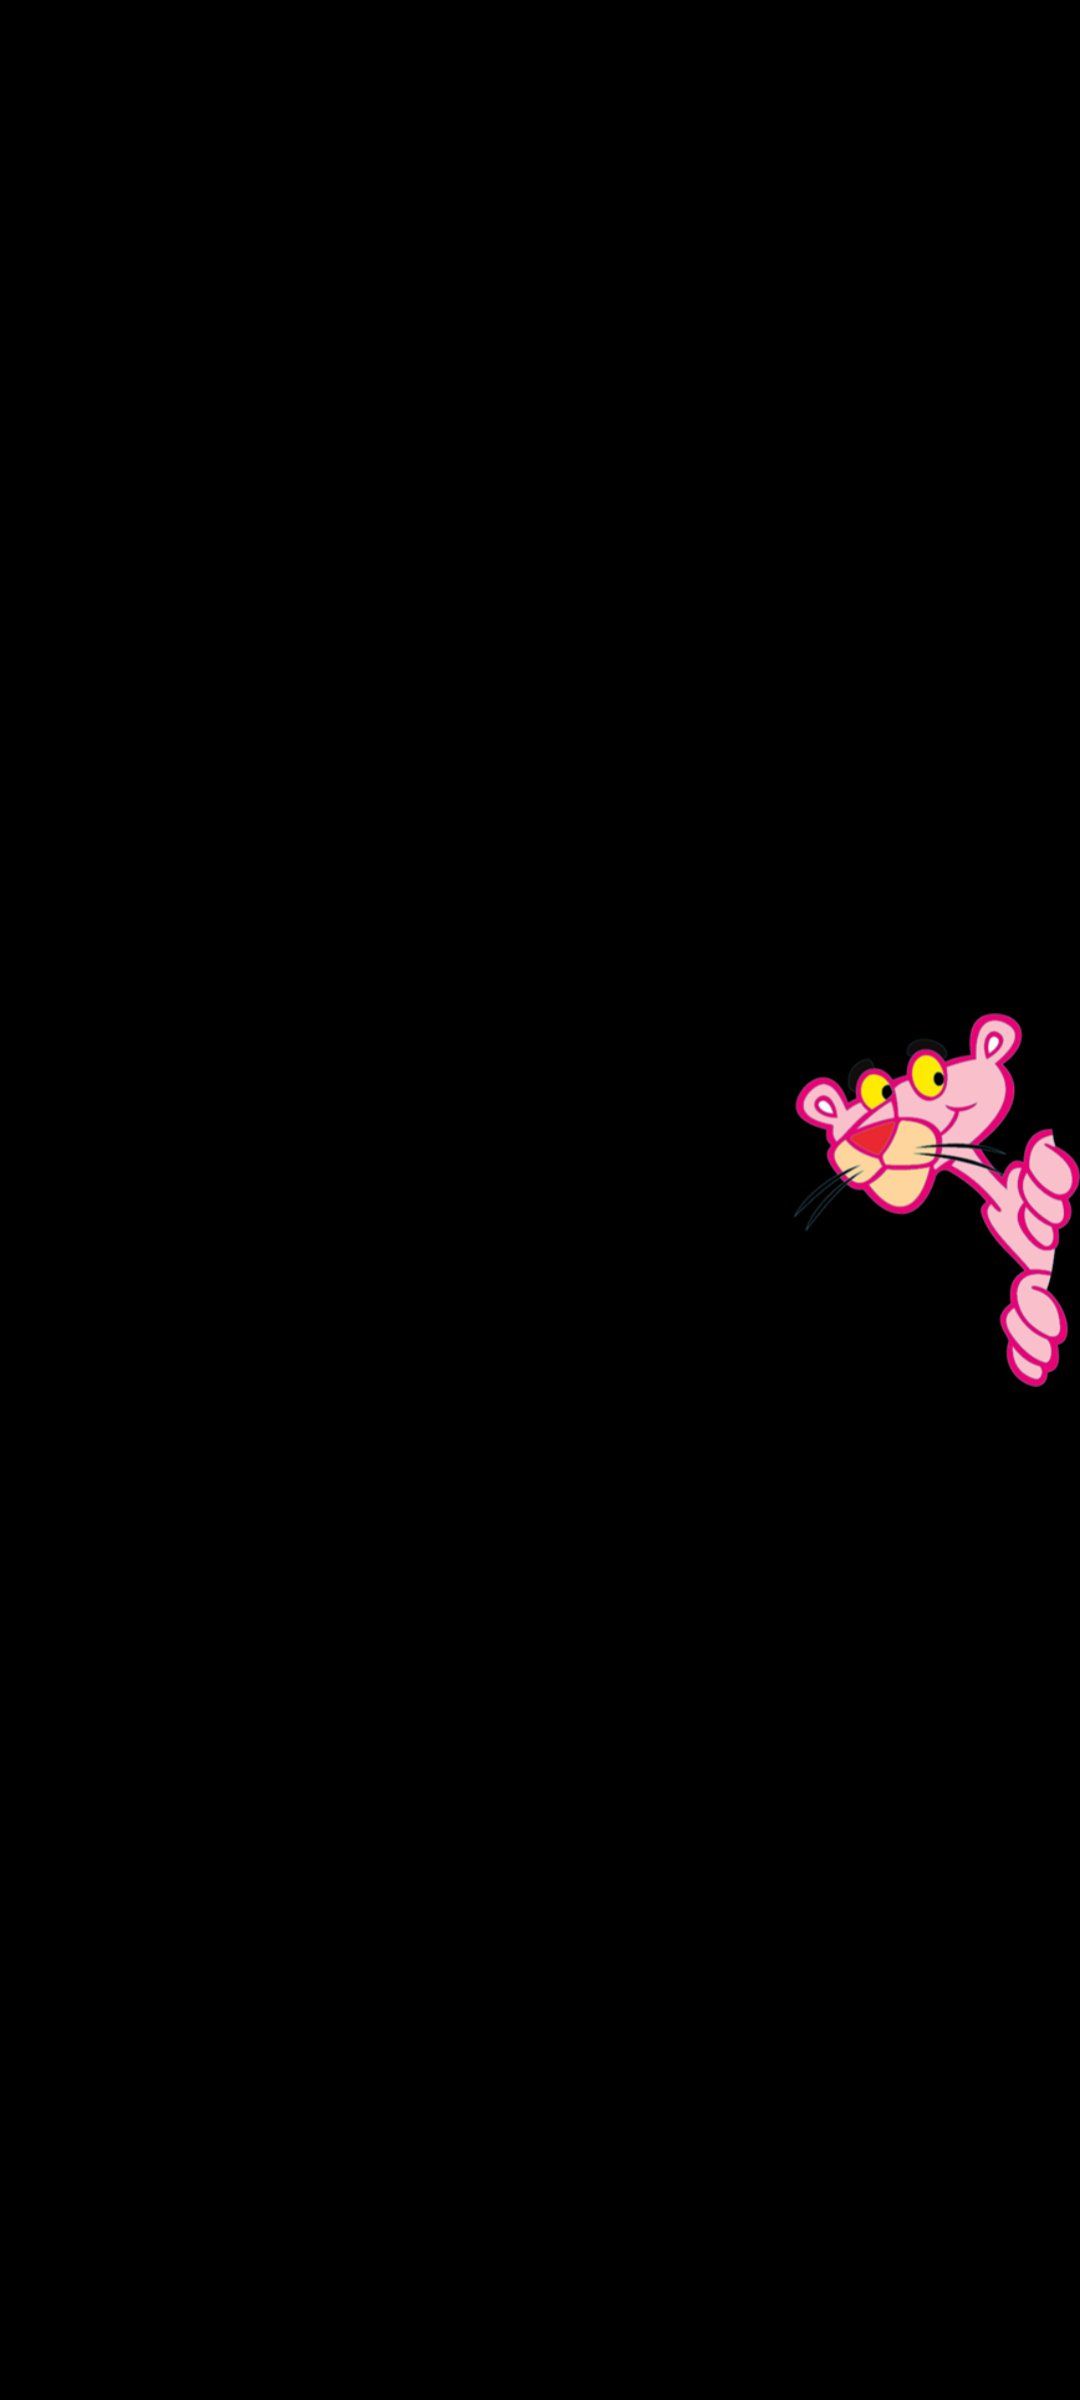 Pink panther wallpaper for android phone - Pink Panther